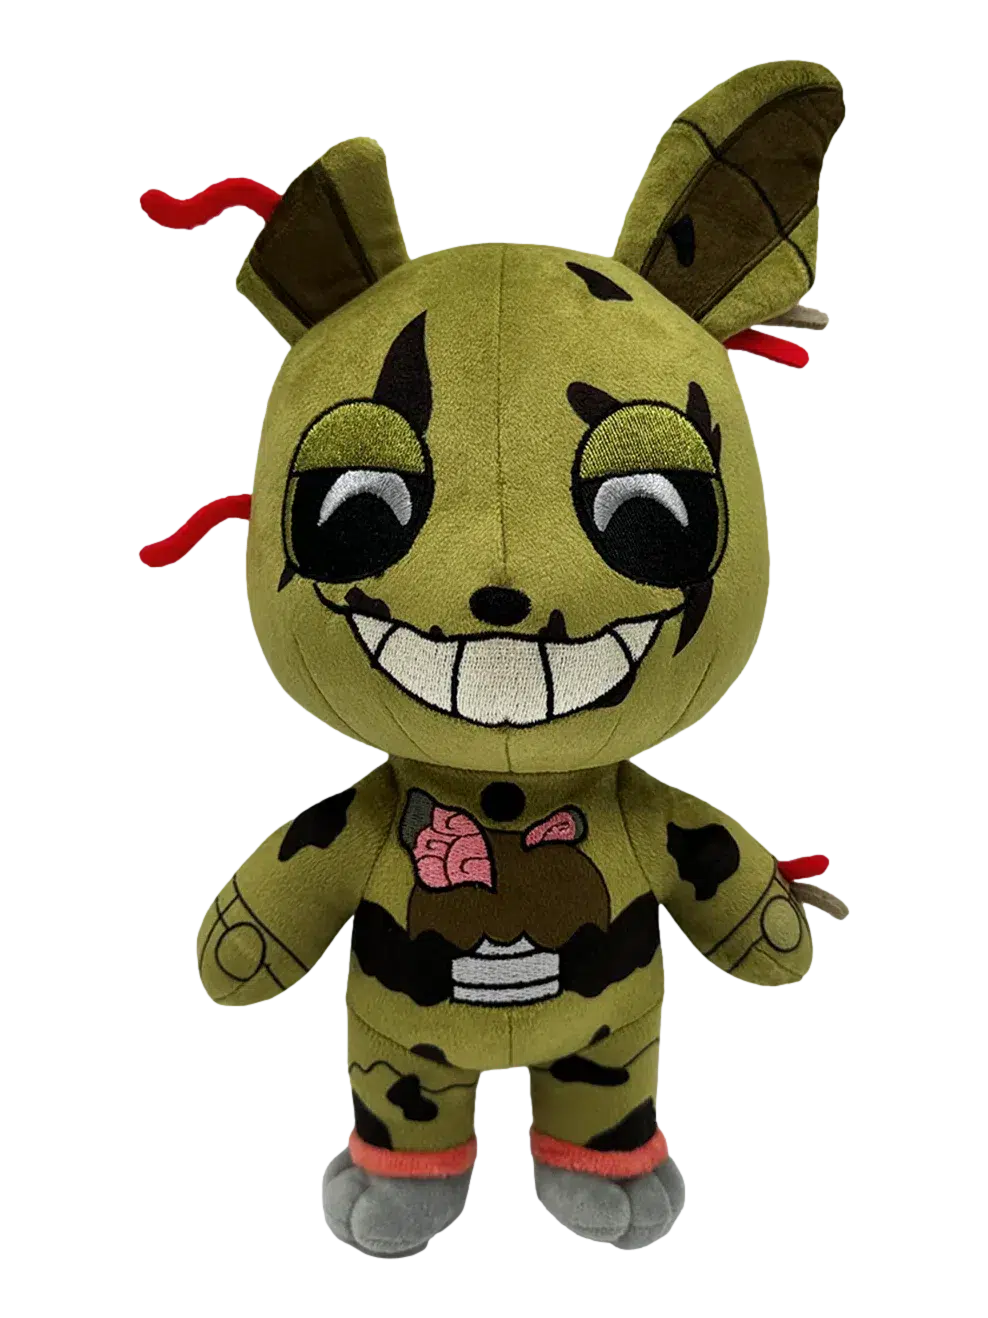 Five Nights at Freddy's: Springtrap Plush (9IN): YouTooz